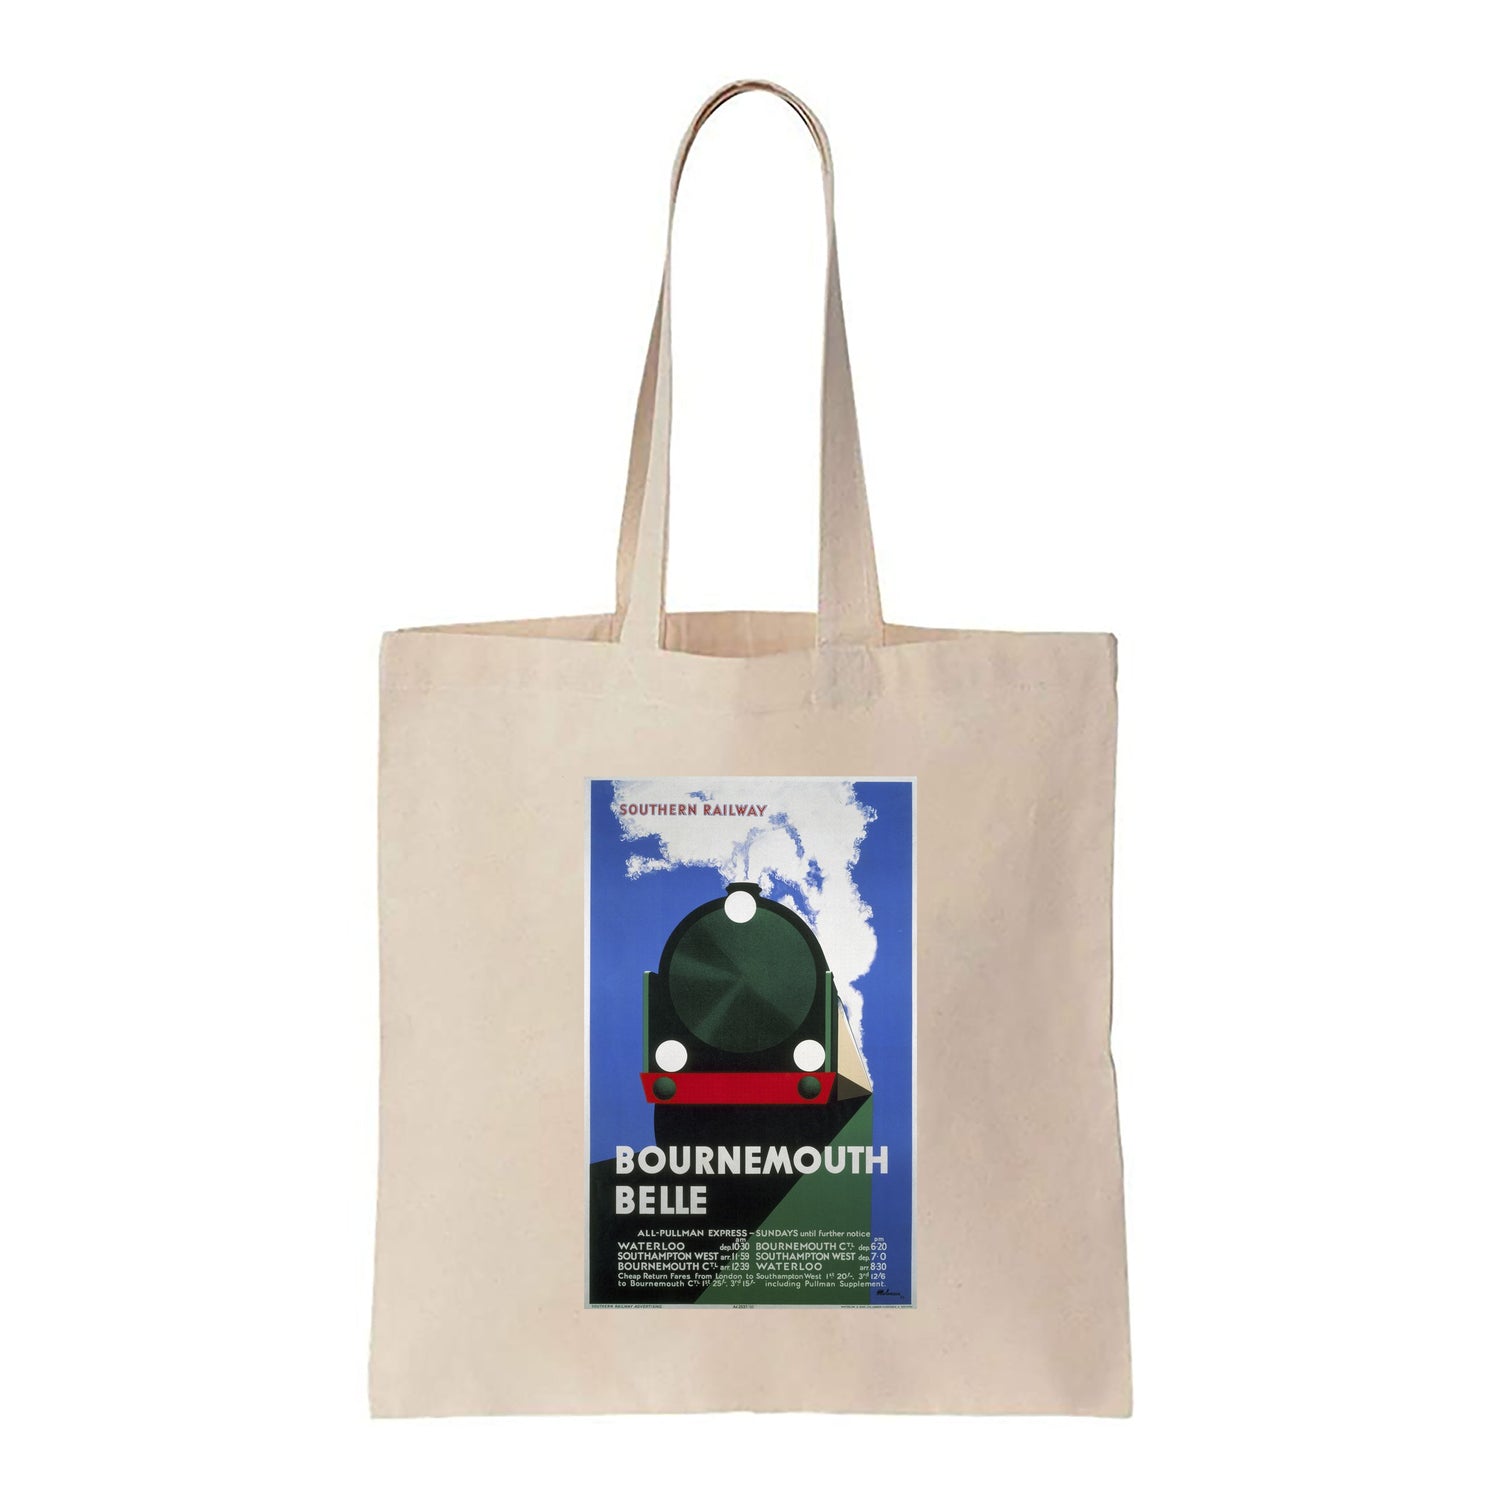 Bournemouth Belle - Southern Railway - Canvas Tote Bag